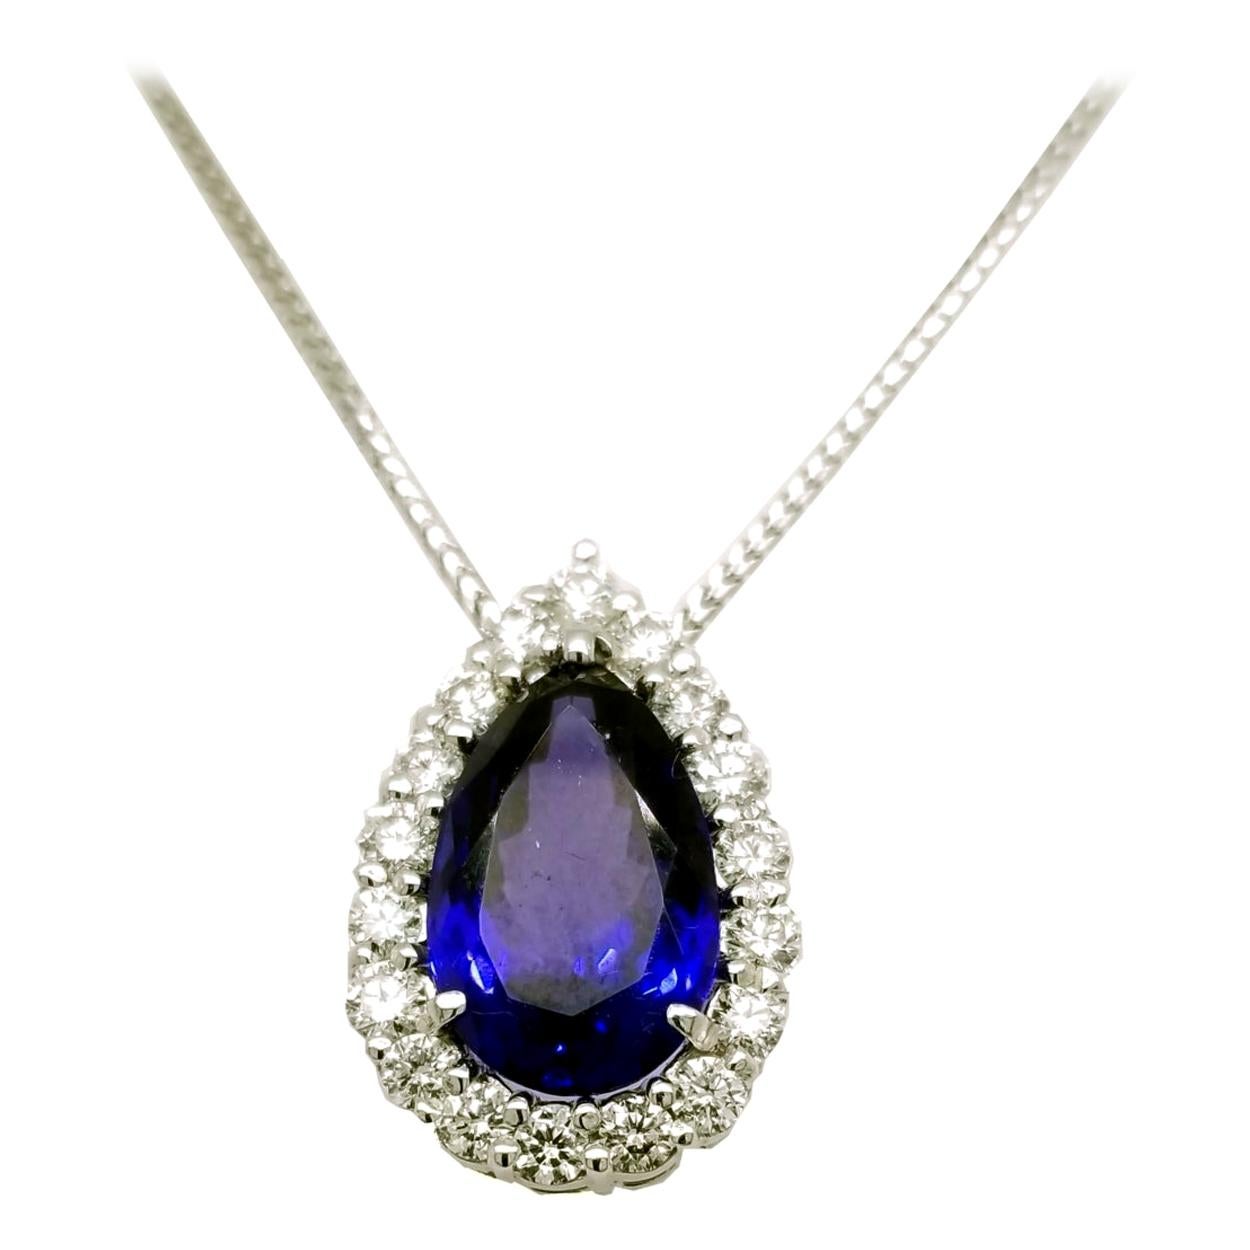 GIA Certified 7.78 Carat Pear Shaped Tanzanite Necklace with 1.29 Carat Diamonds For Sale